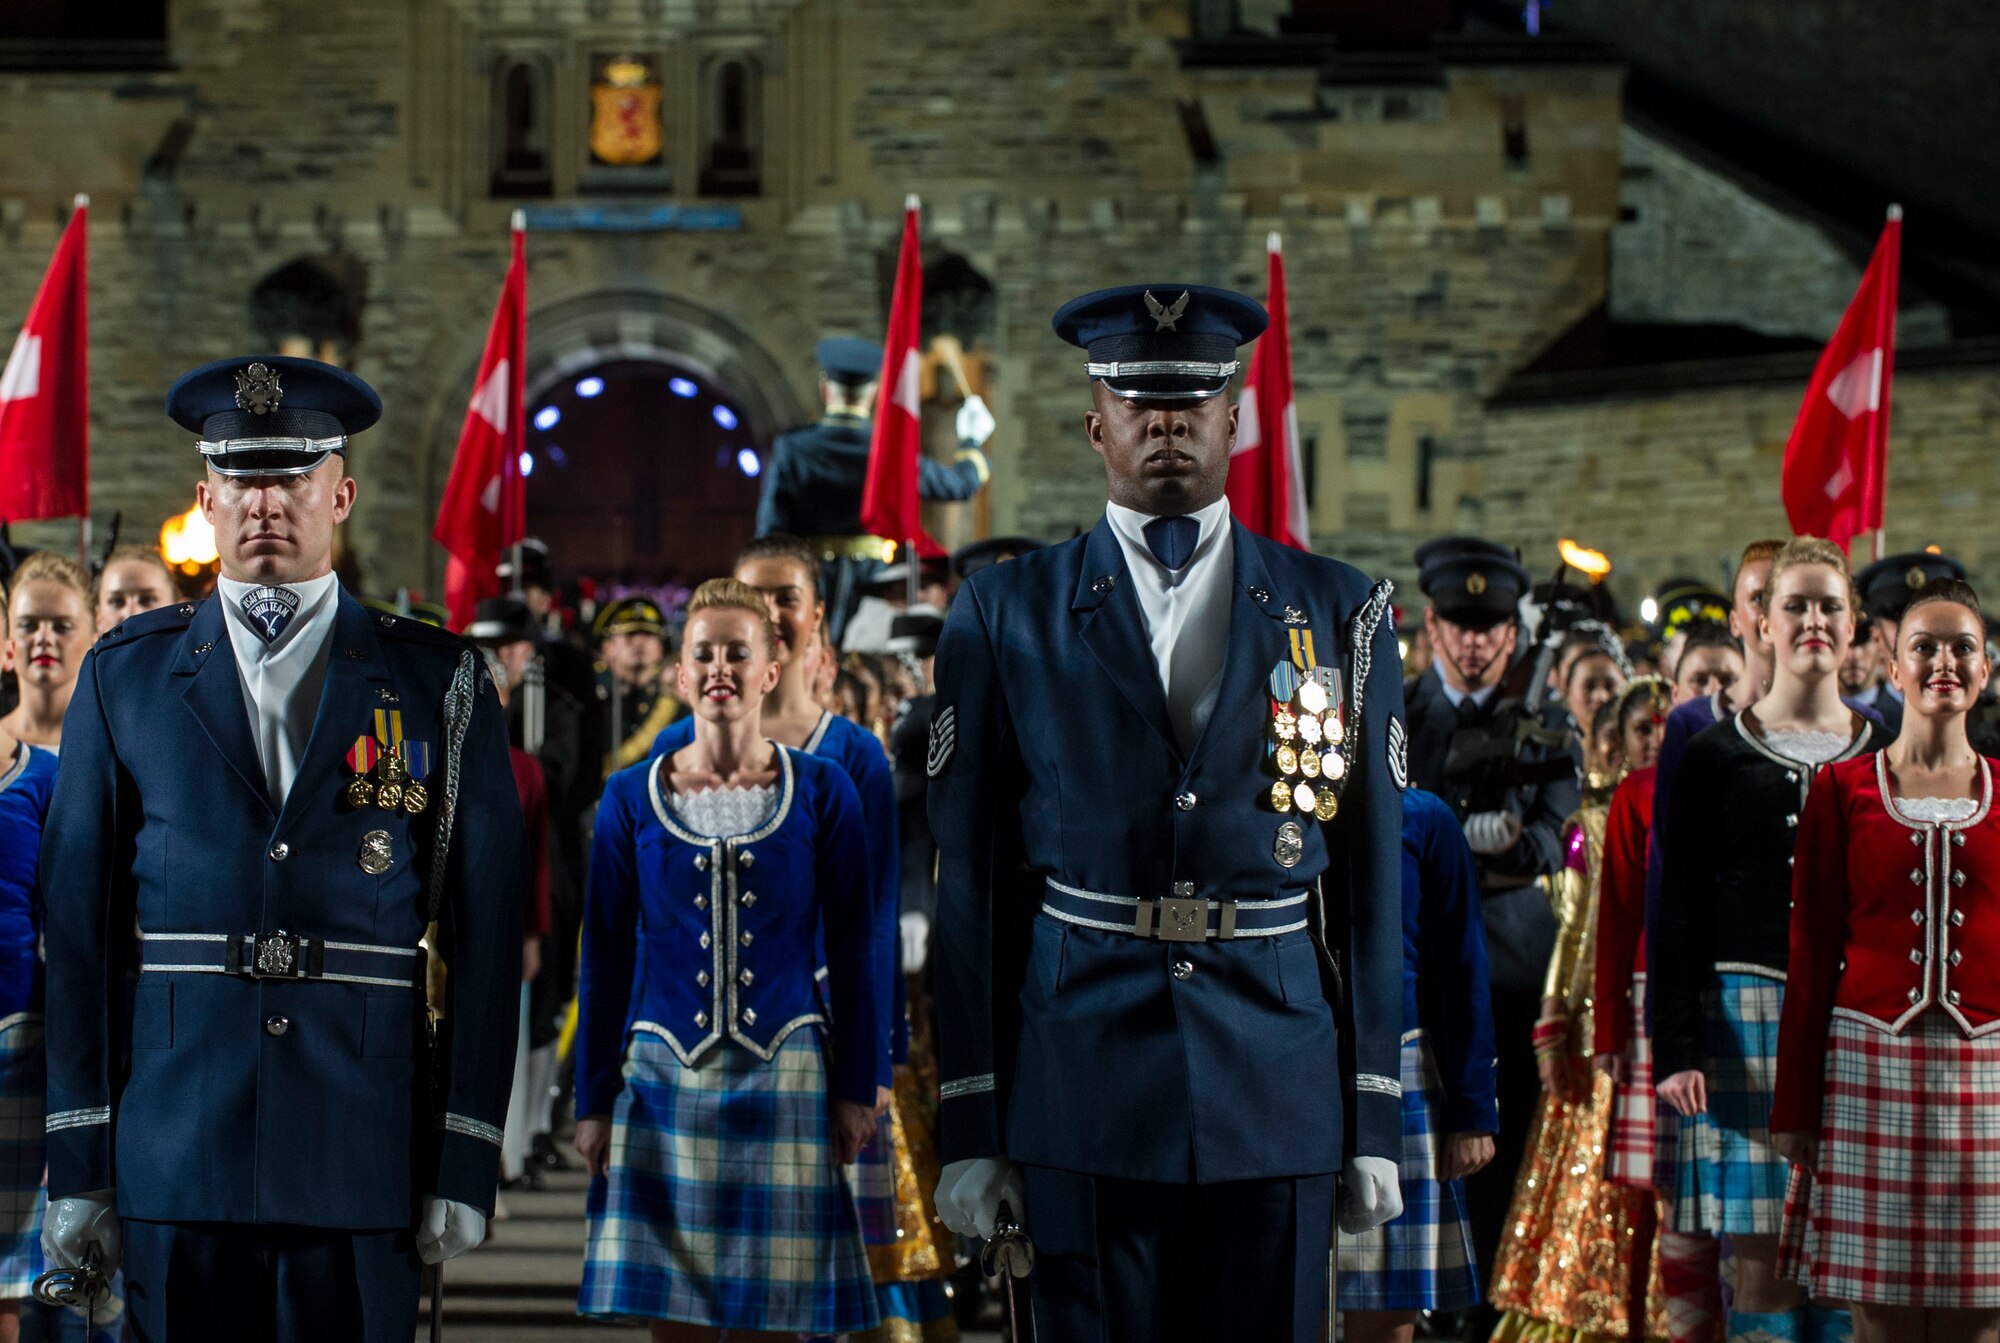 Capt. Cahn Wadhams, United States Air Force Honor Guard Drill Team commander and Tech. Sgt. Maurice Cheaney, USAF Honor Guard NCO-in-charge of training stand in formation during the finale of the preview show of Royal Edinburgh Military Tattoo on the Esplanade of the Edinburgh Castle in Edinburgh, Scotland Aug. 6, 2015. (U.S. Air Force photo/Staff Sgt. Nichelle Anderson/Released)